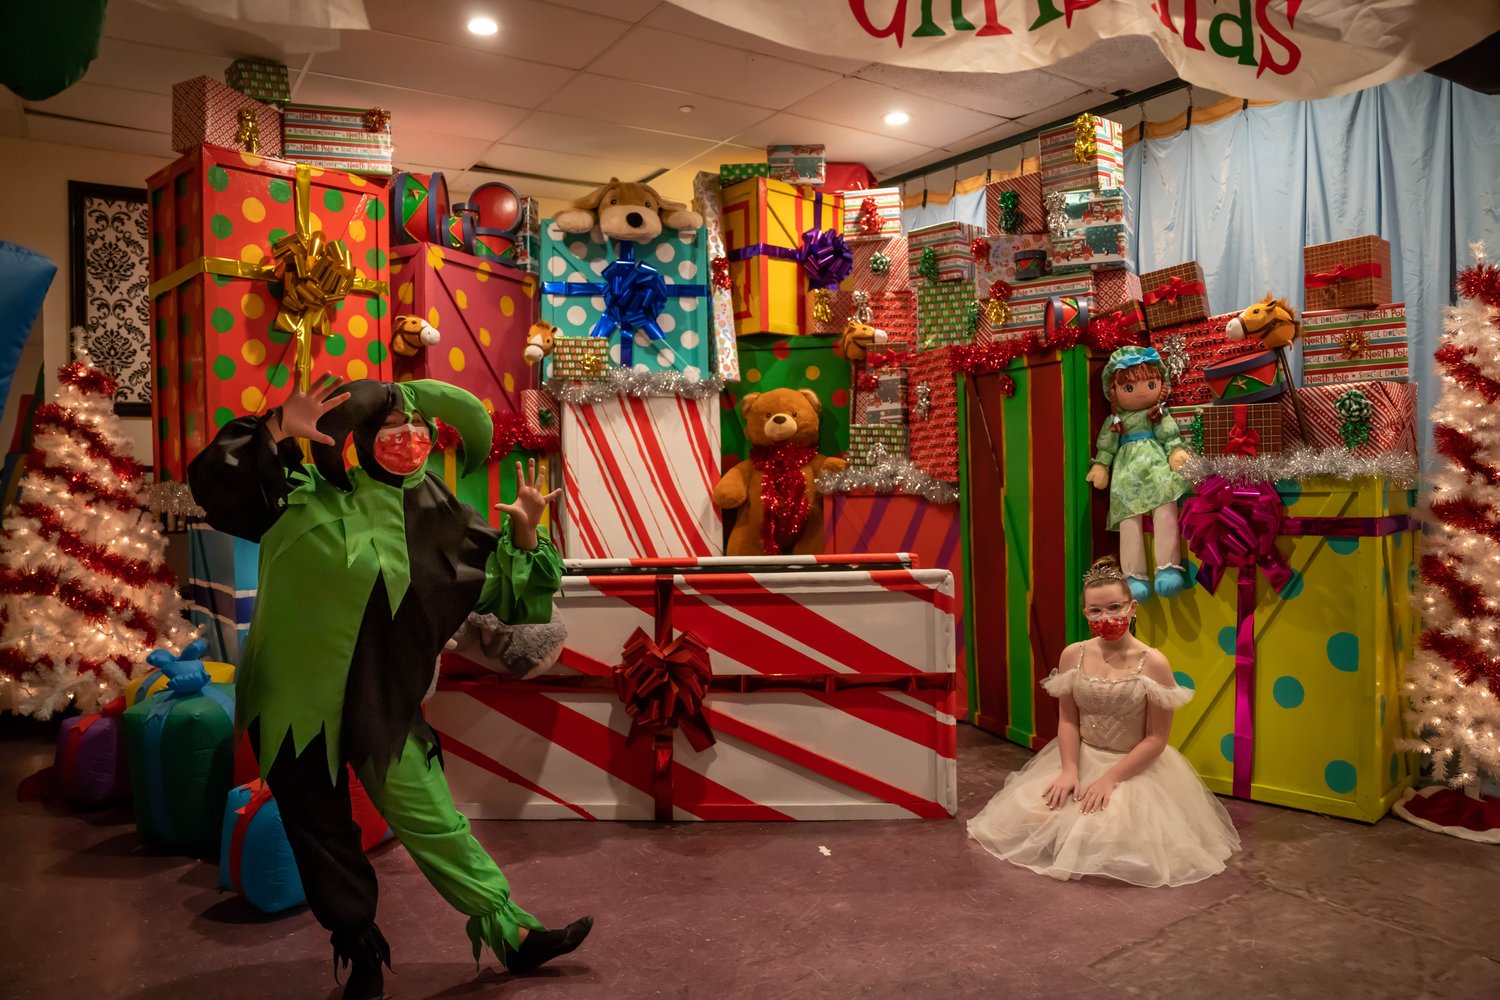 The gift room has presents waiting to be loaded onto Santa’s sleigh, with some of them coming to life.